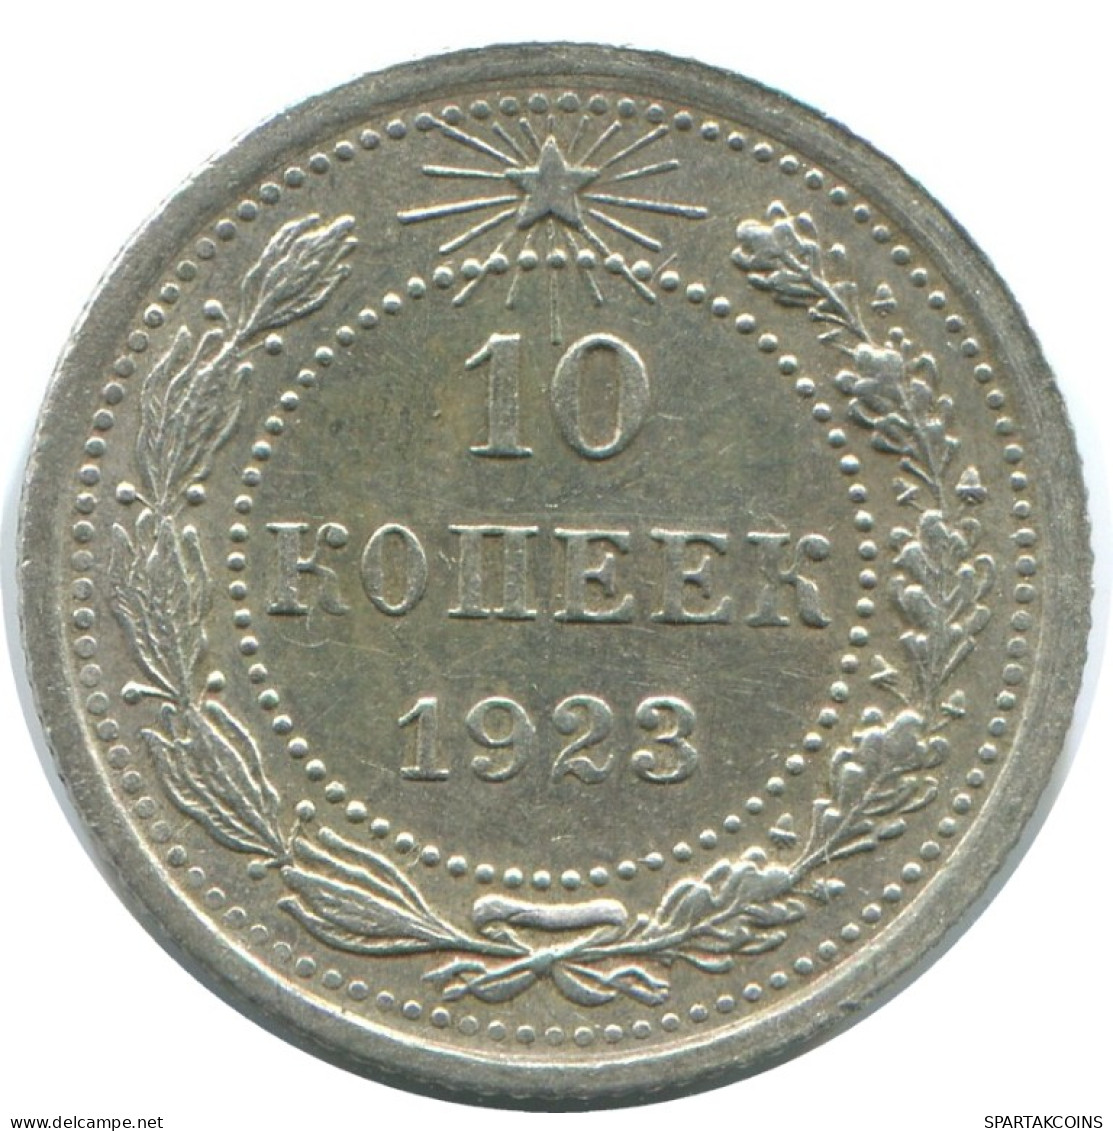 10 KOPEKS 1923 RUSSIE RUSSIA RSFSR ARGENT Pièce HIGH GRADE #AE976.4.F.A - Rusia